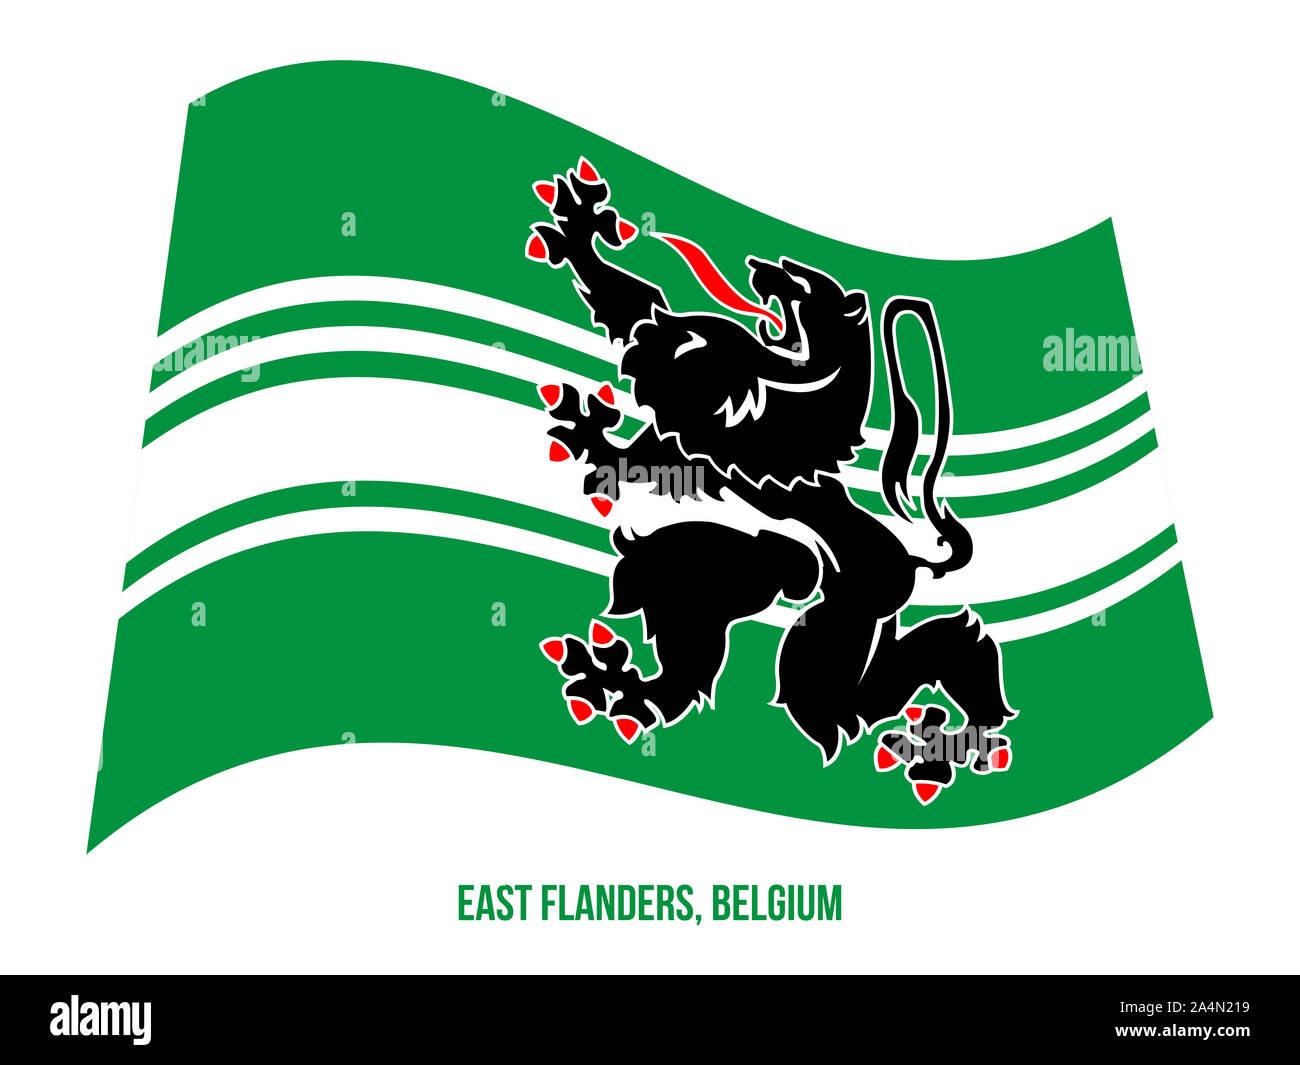 East Flanders Flag Waving Vector Illustration on White Background. Provinces Flags of Belgium. Stock Photo